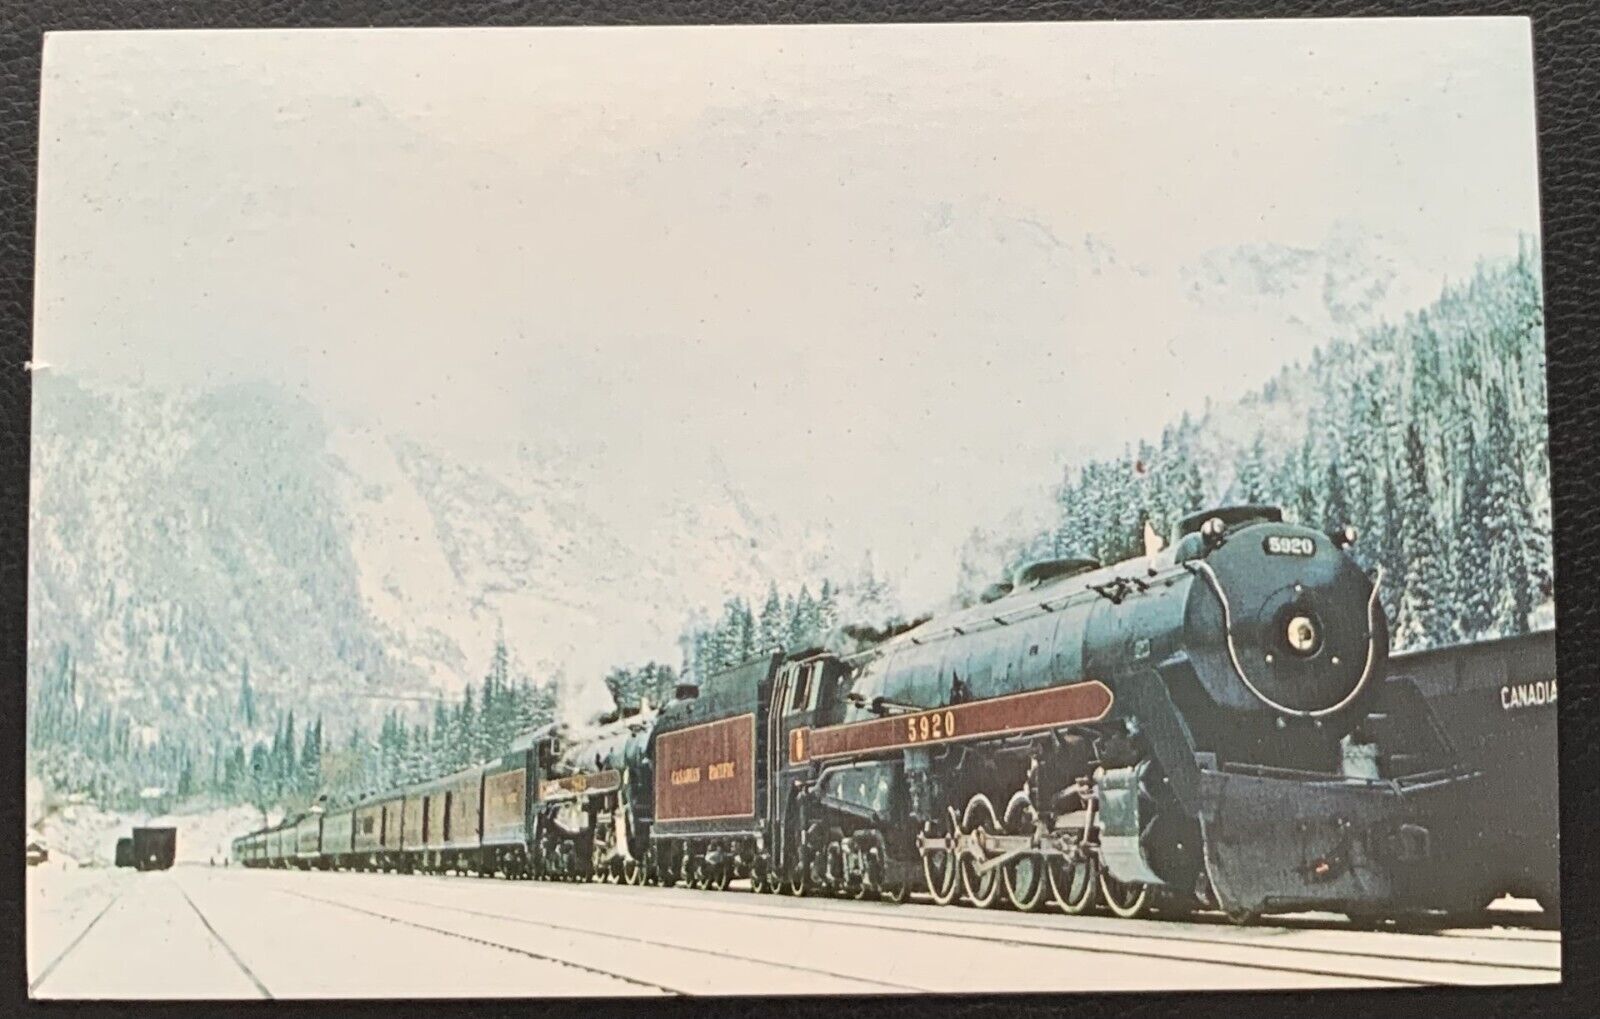 CANADIAN PACIFIC 5920 CANADIAN PACIFIC RAILROAD LOCOMOTIVE CANADIAN ROCKIES NEW